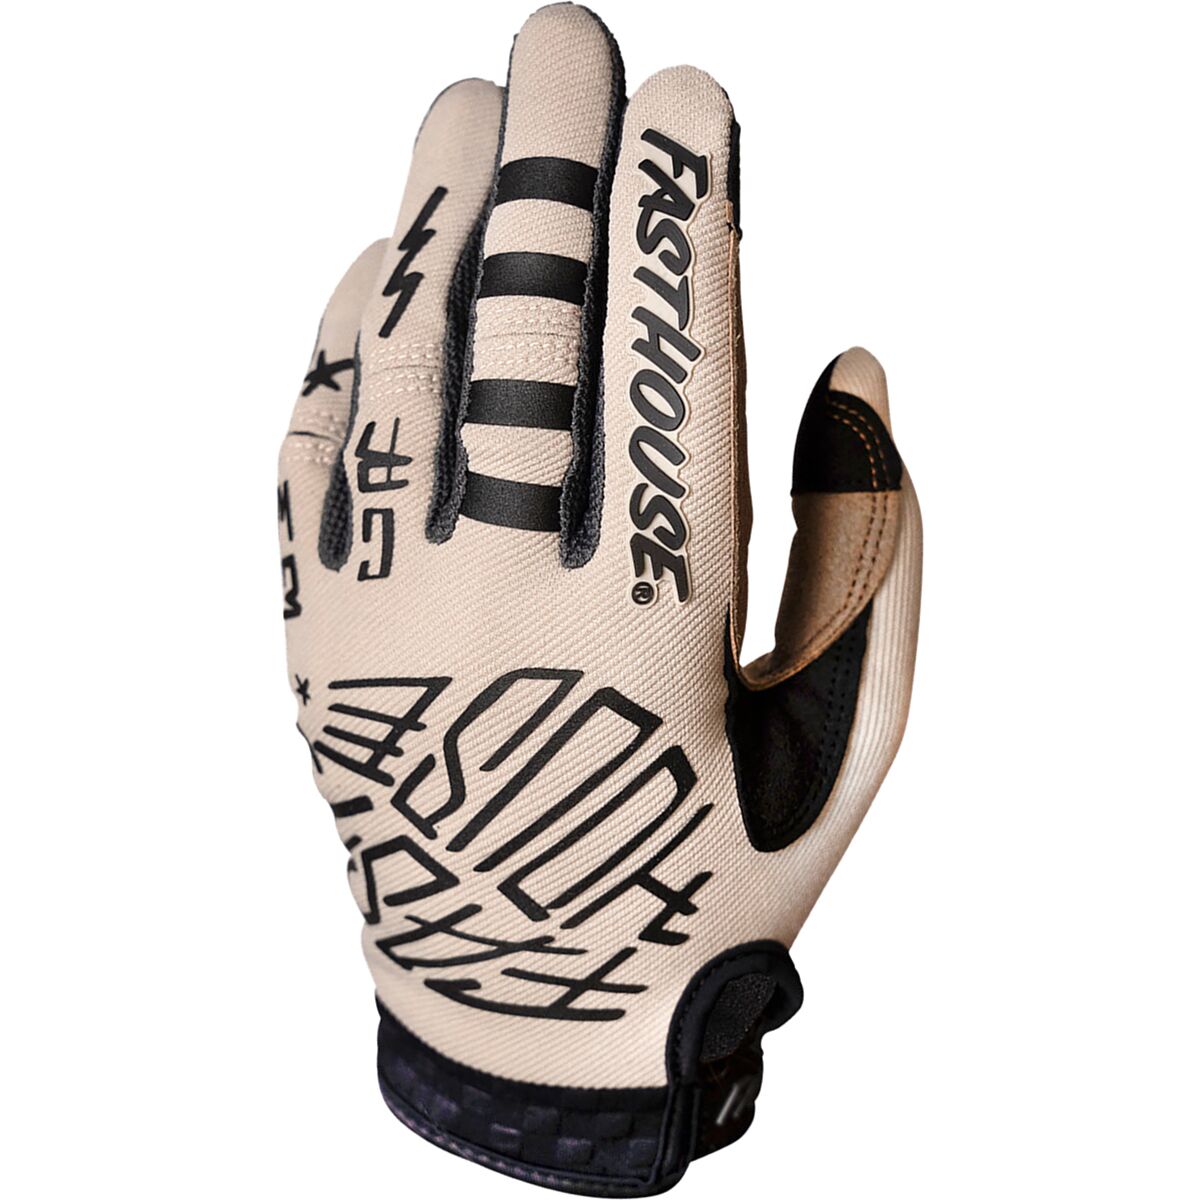 Fasthouse Speed Style Stomp Glove